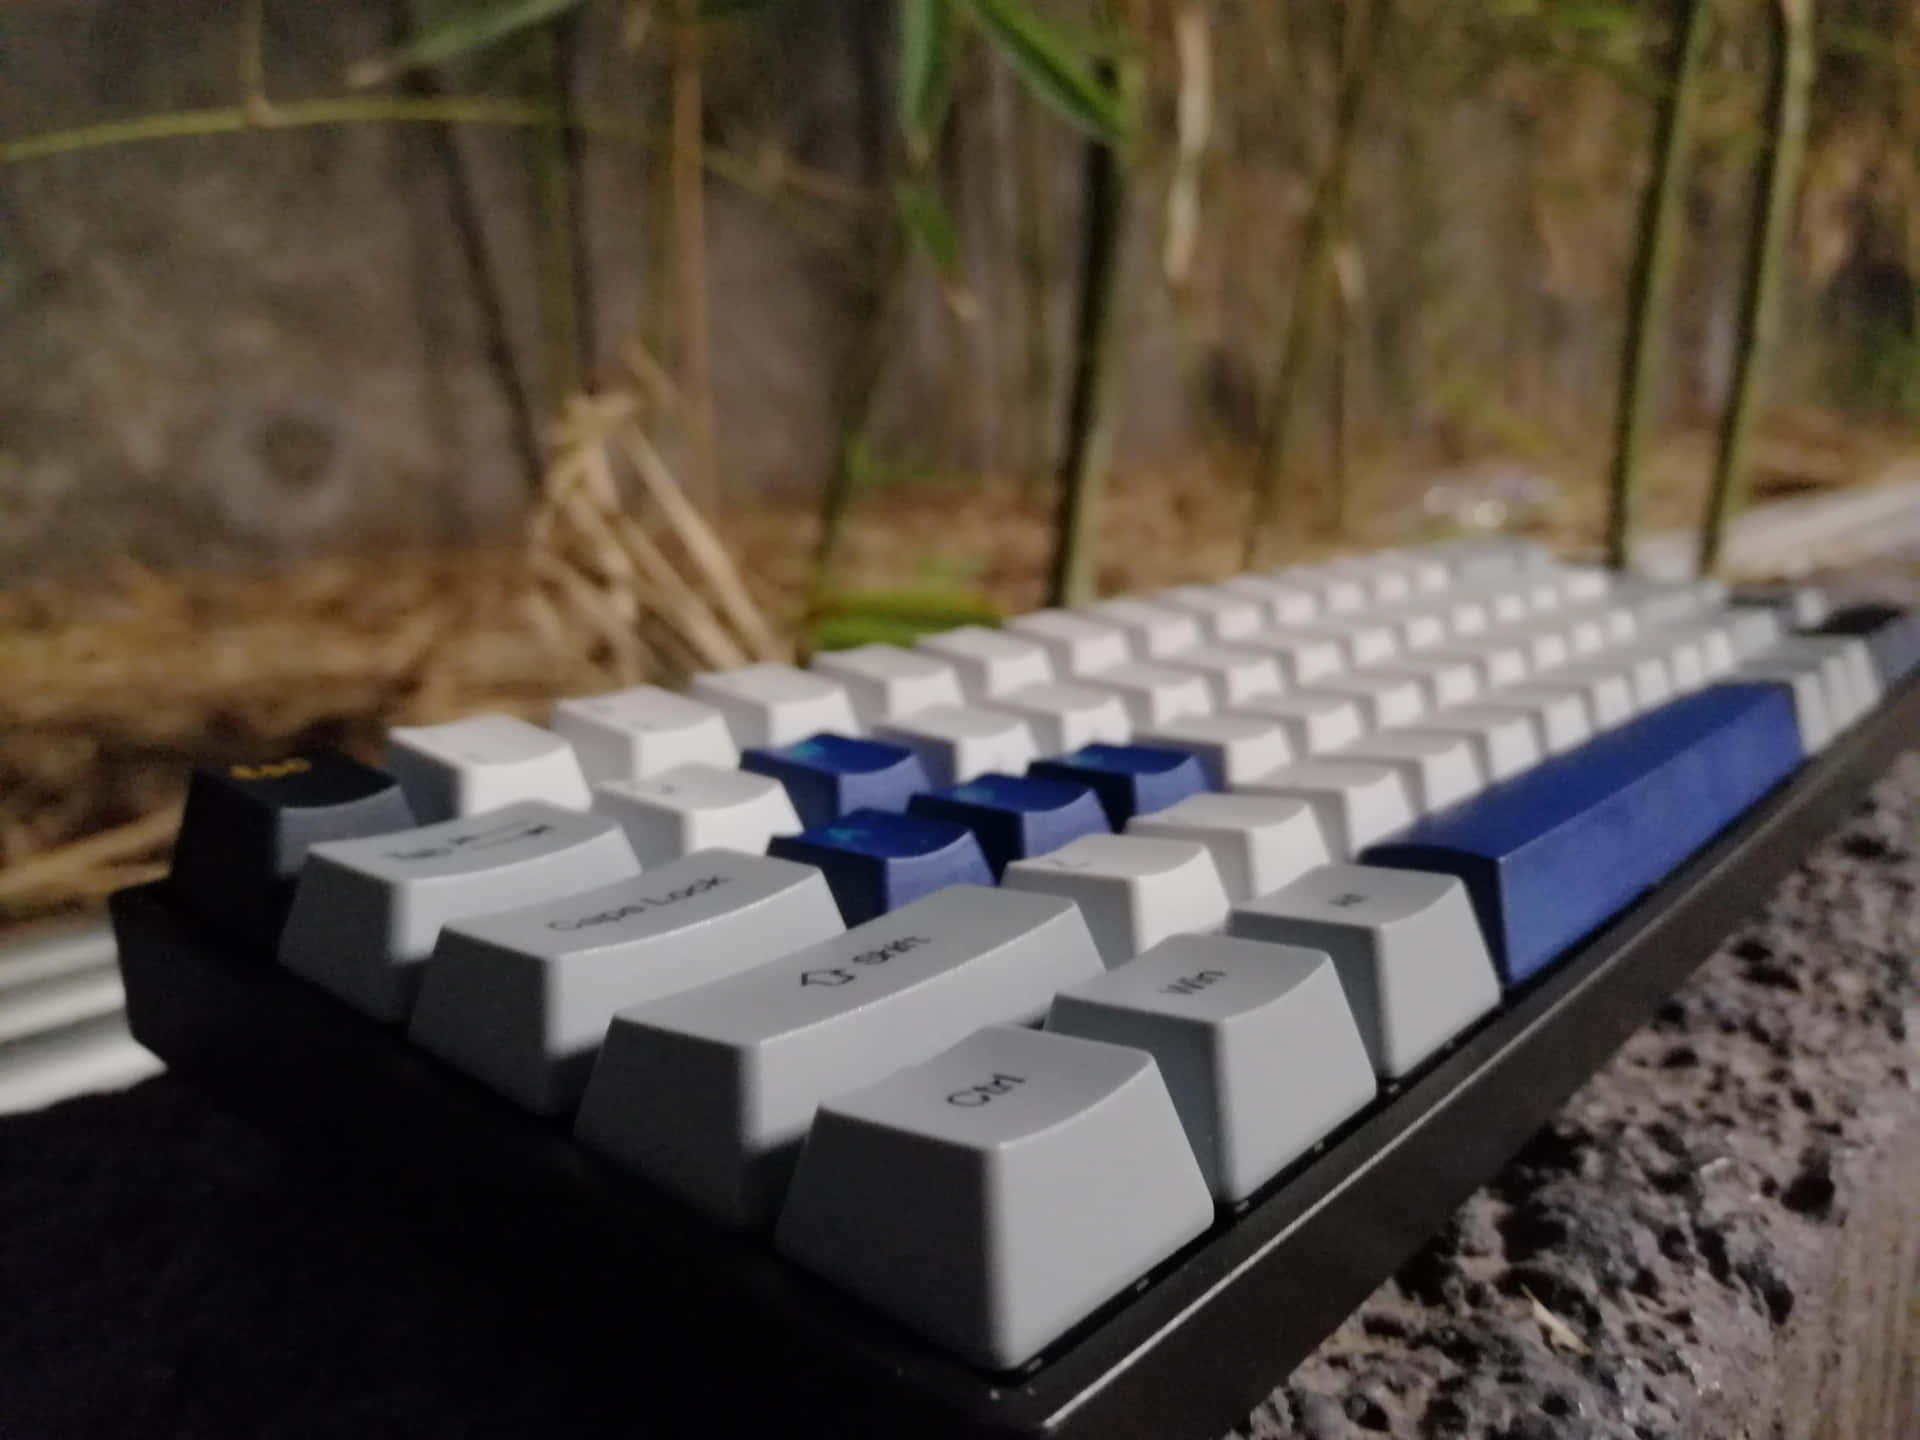 A Blue And White Keyboard Sitting On A Rock